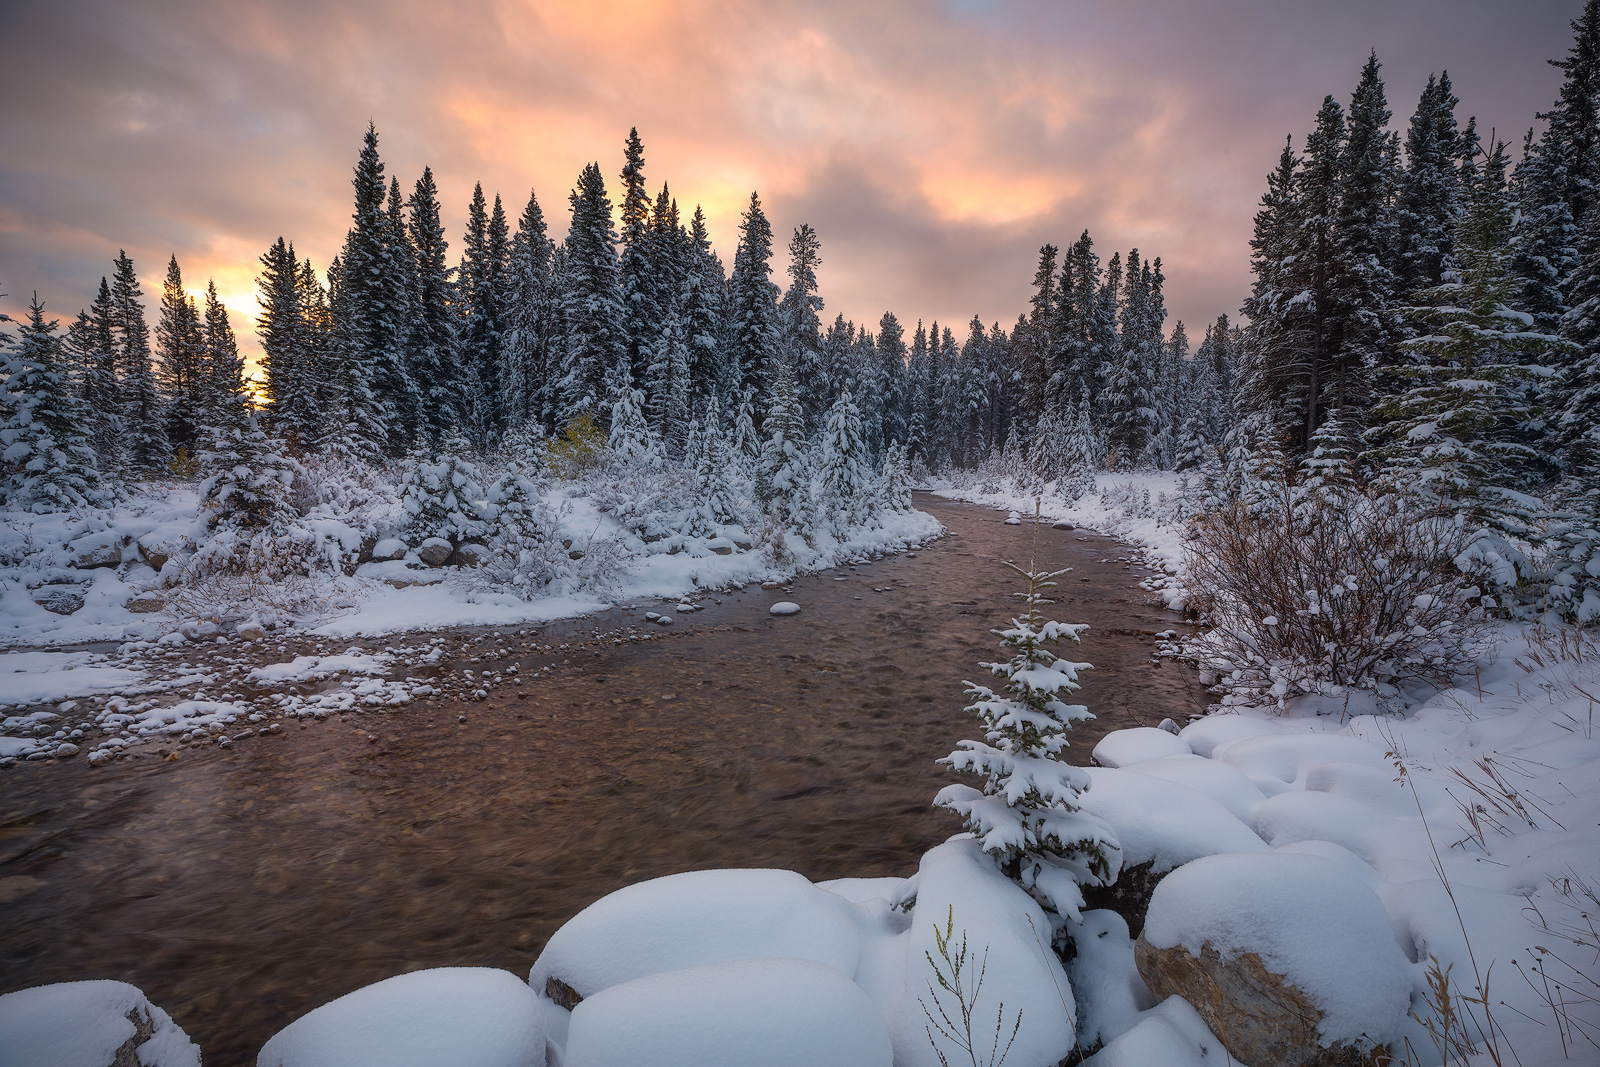 A creek cuts through a Winter wonderland in the Canadian Rockies.